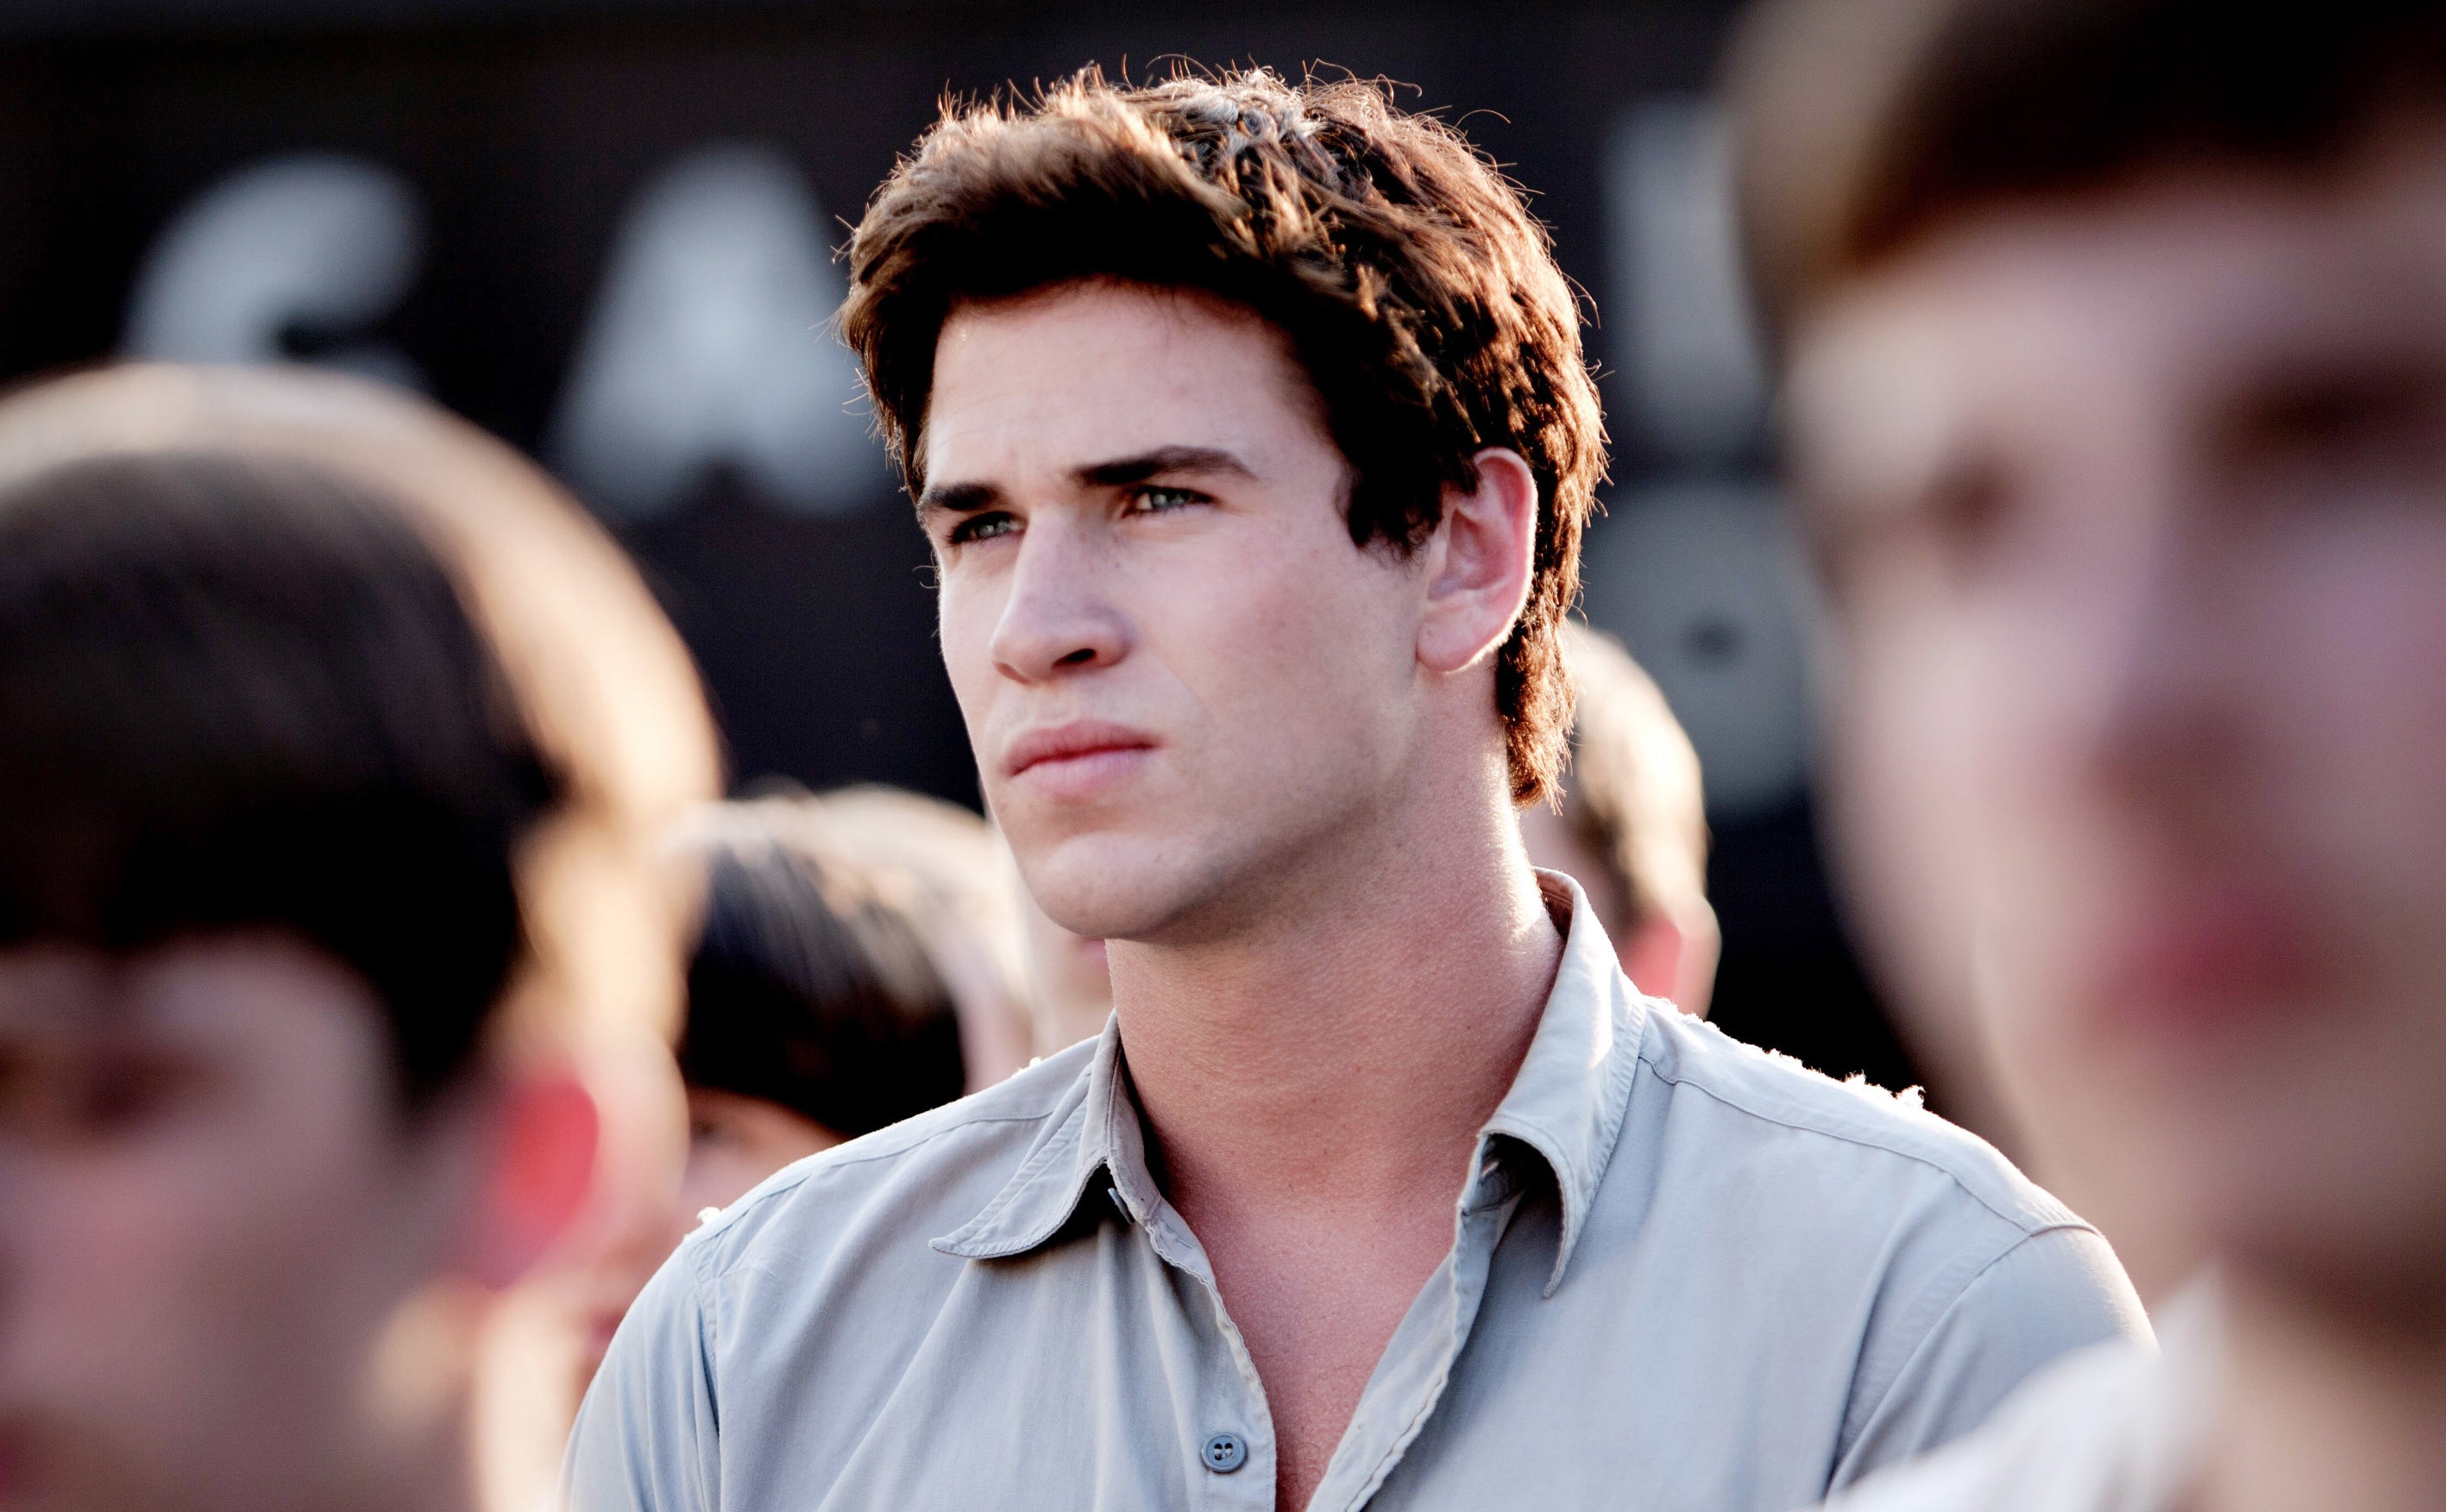 Gale in the film